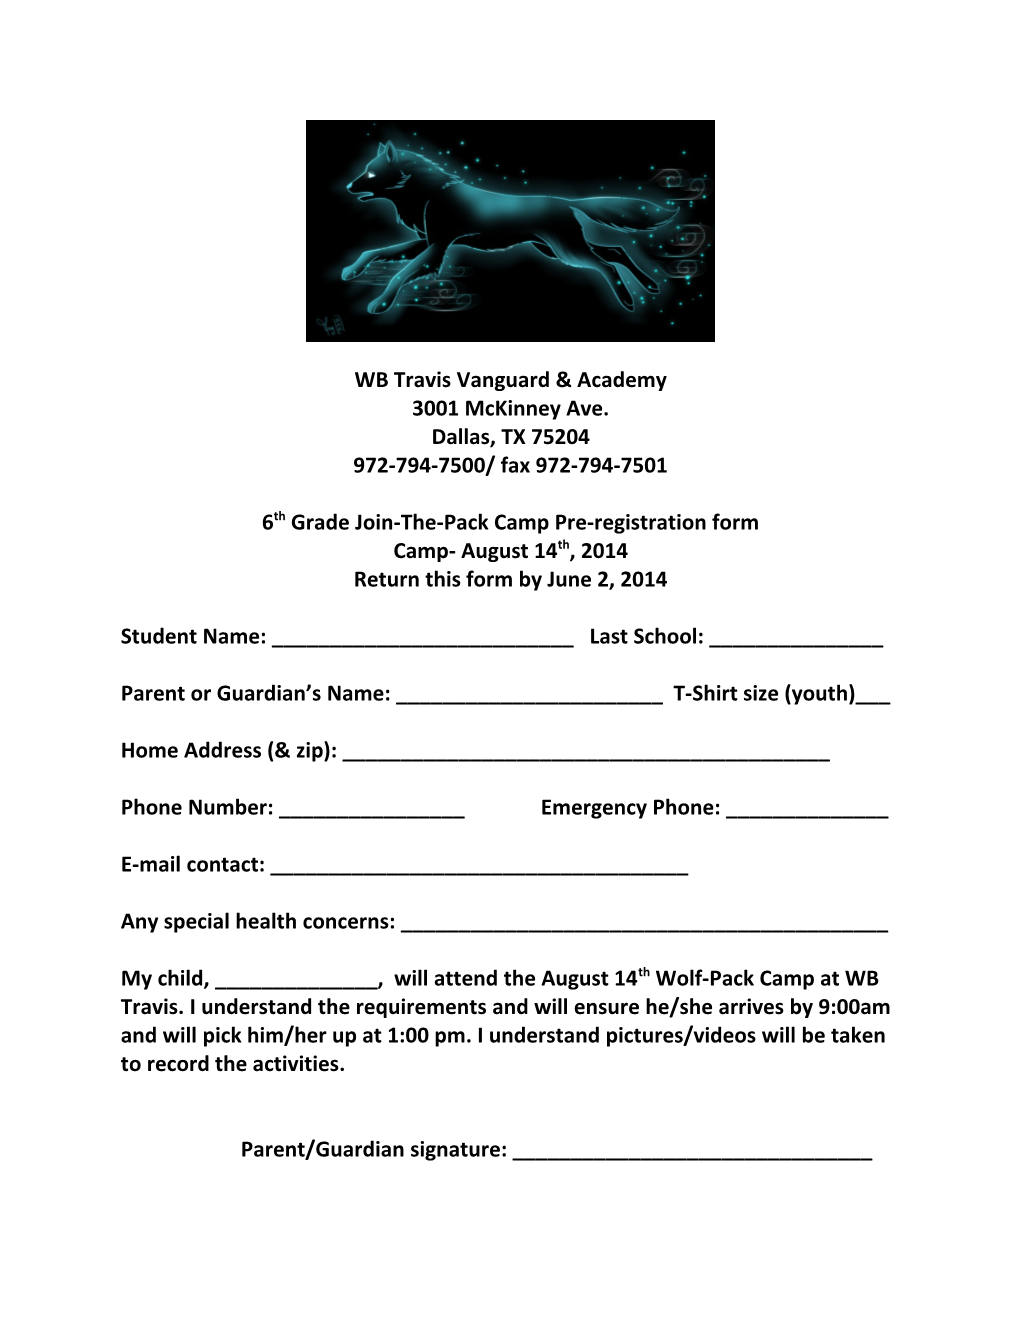 6Th Grade Join-The-Pack Camp Pre-Registration Form